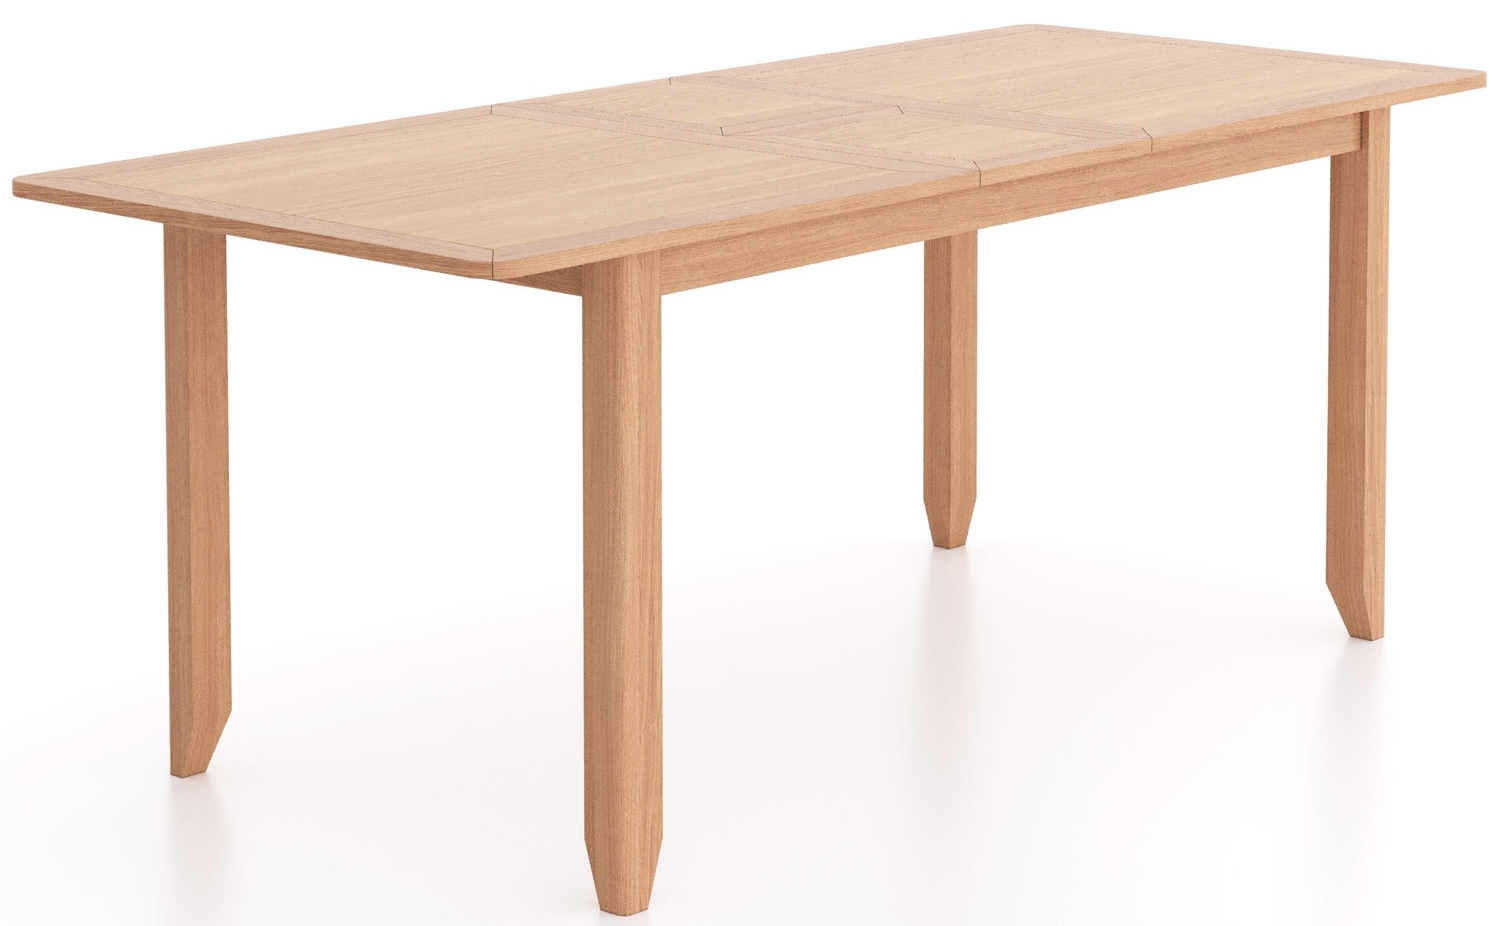 Arden Dining Table 160cm Seats 6 Diners Rectangular Top